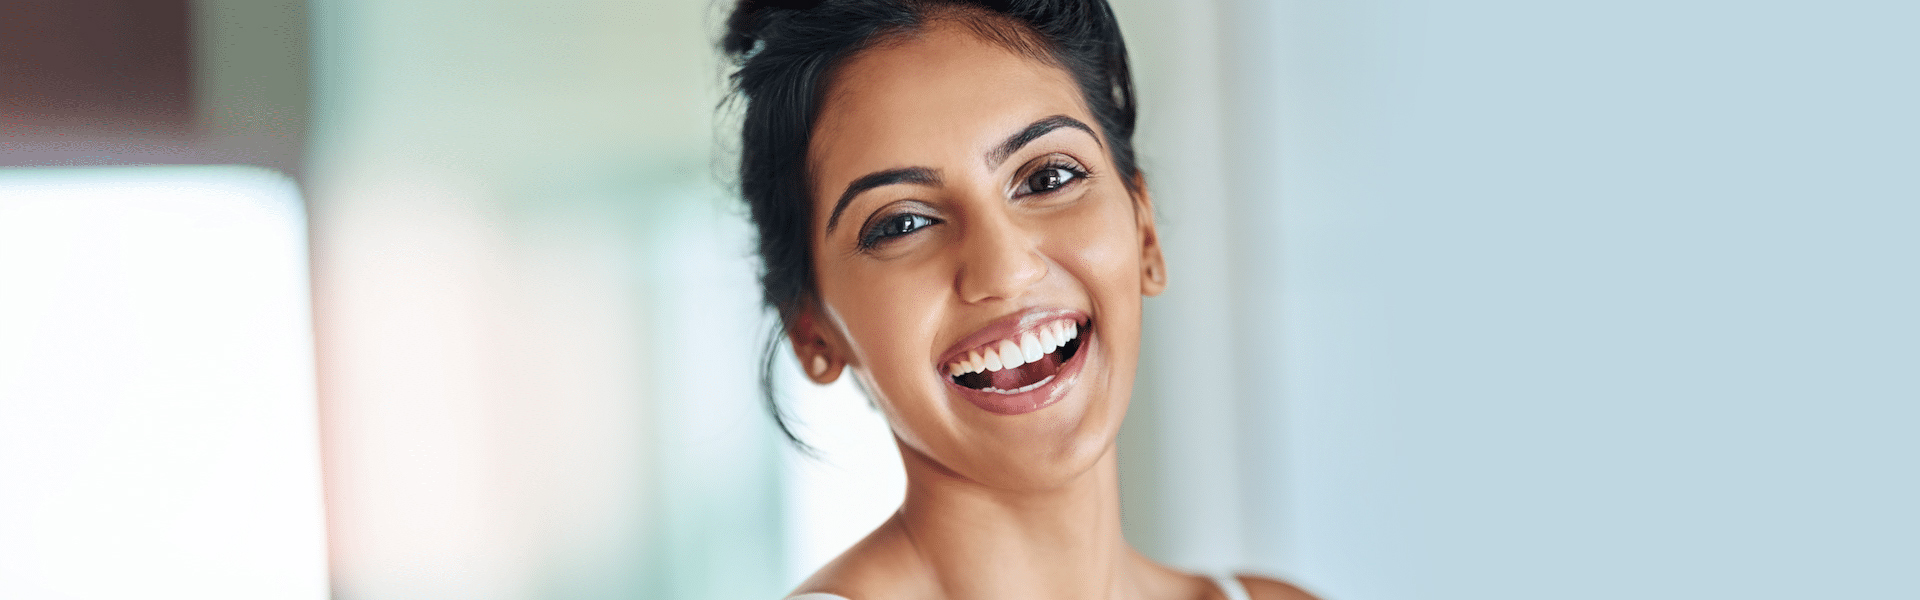 The Advanced Guide to Revamping Your Smile Using Dental Implants